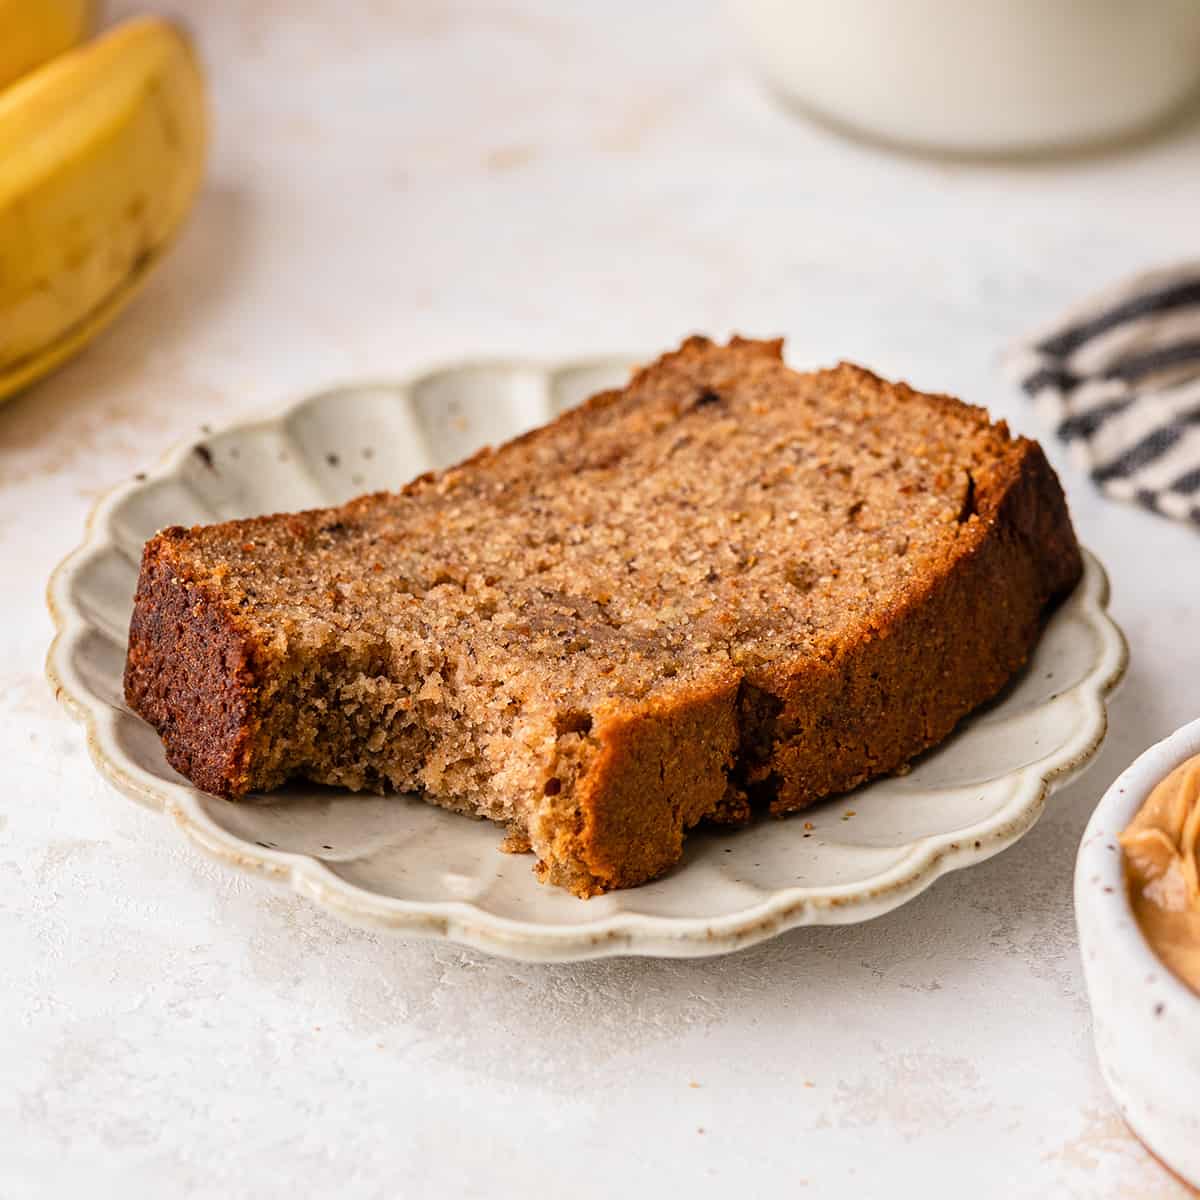 a slice of Peanut Butter Banana Bread on a plate with a bite taken out of it